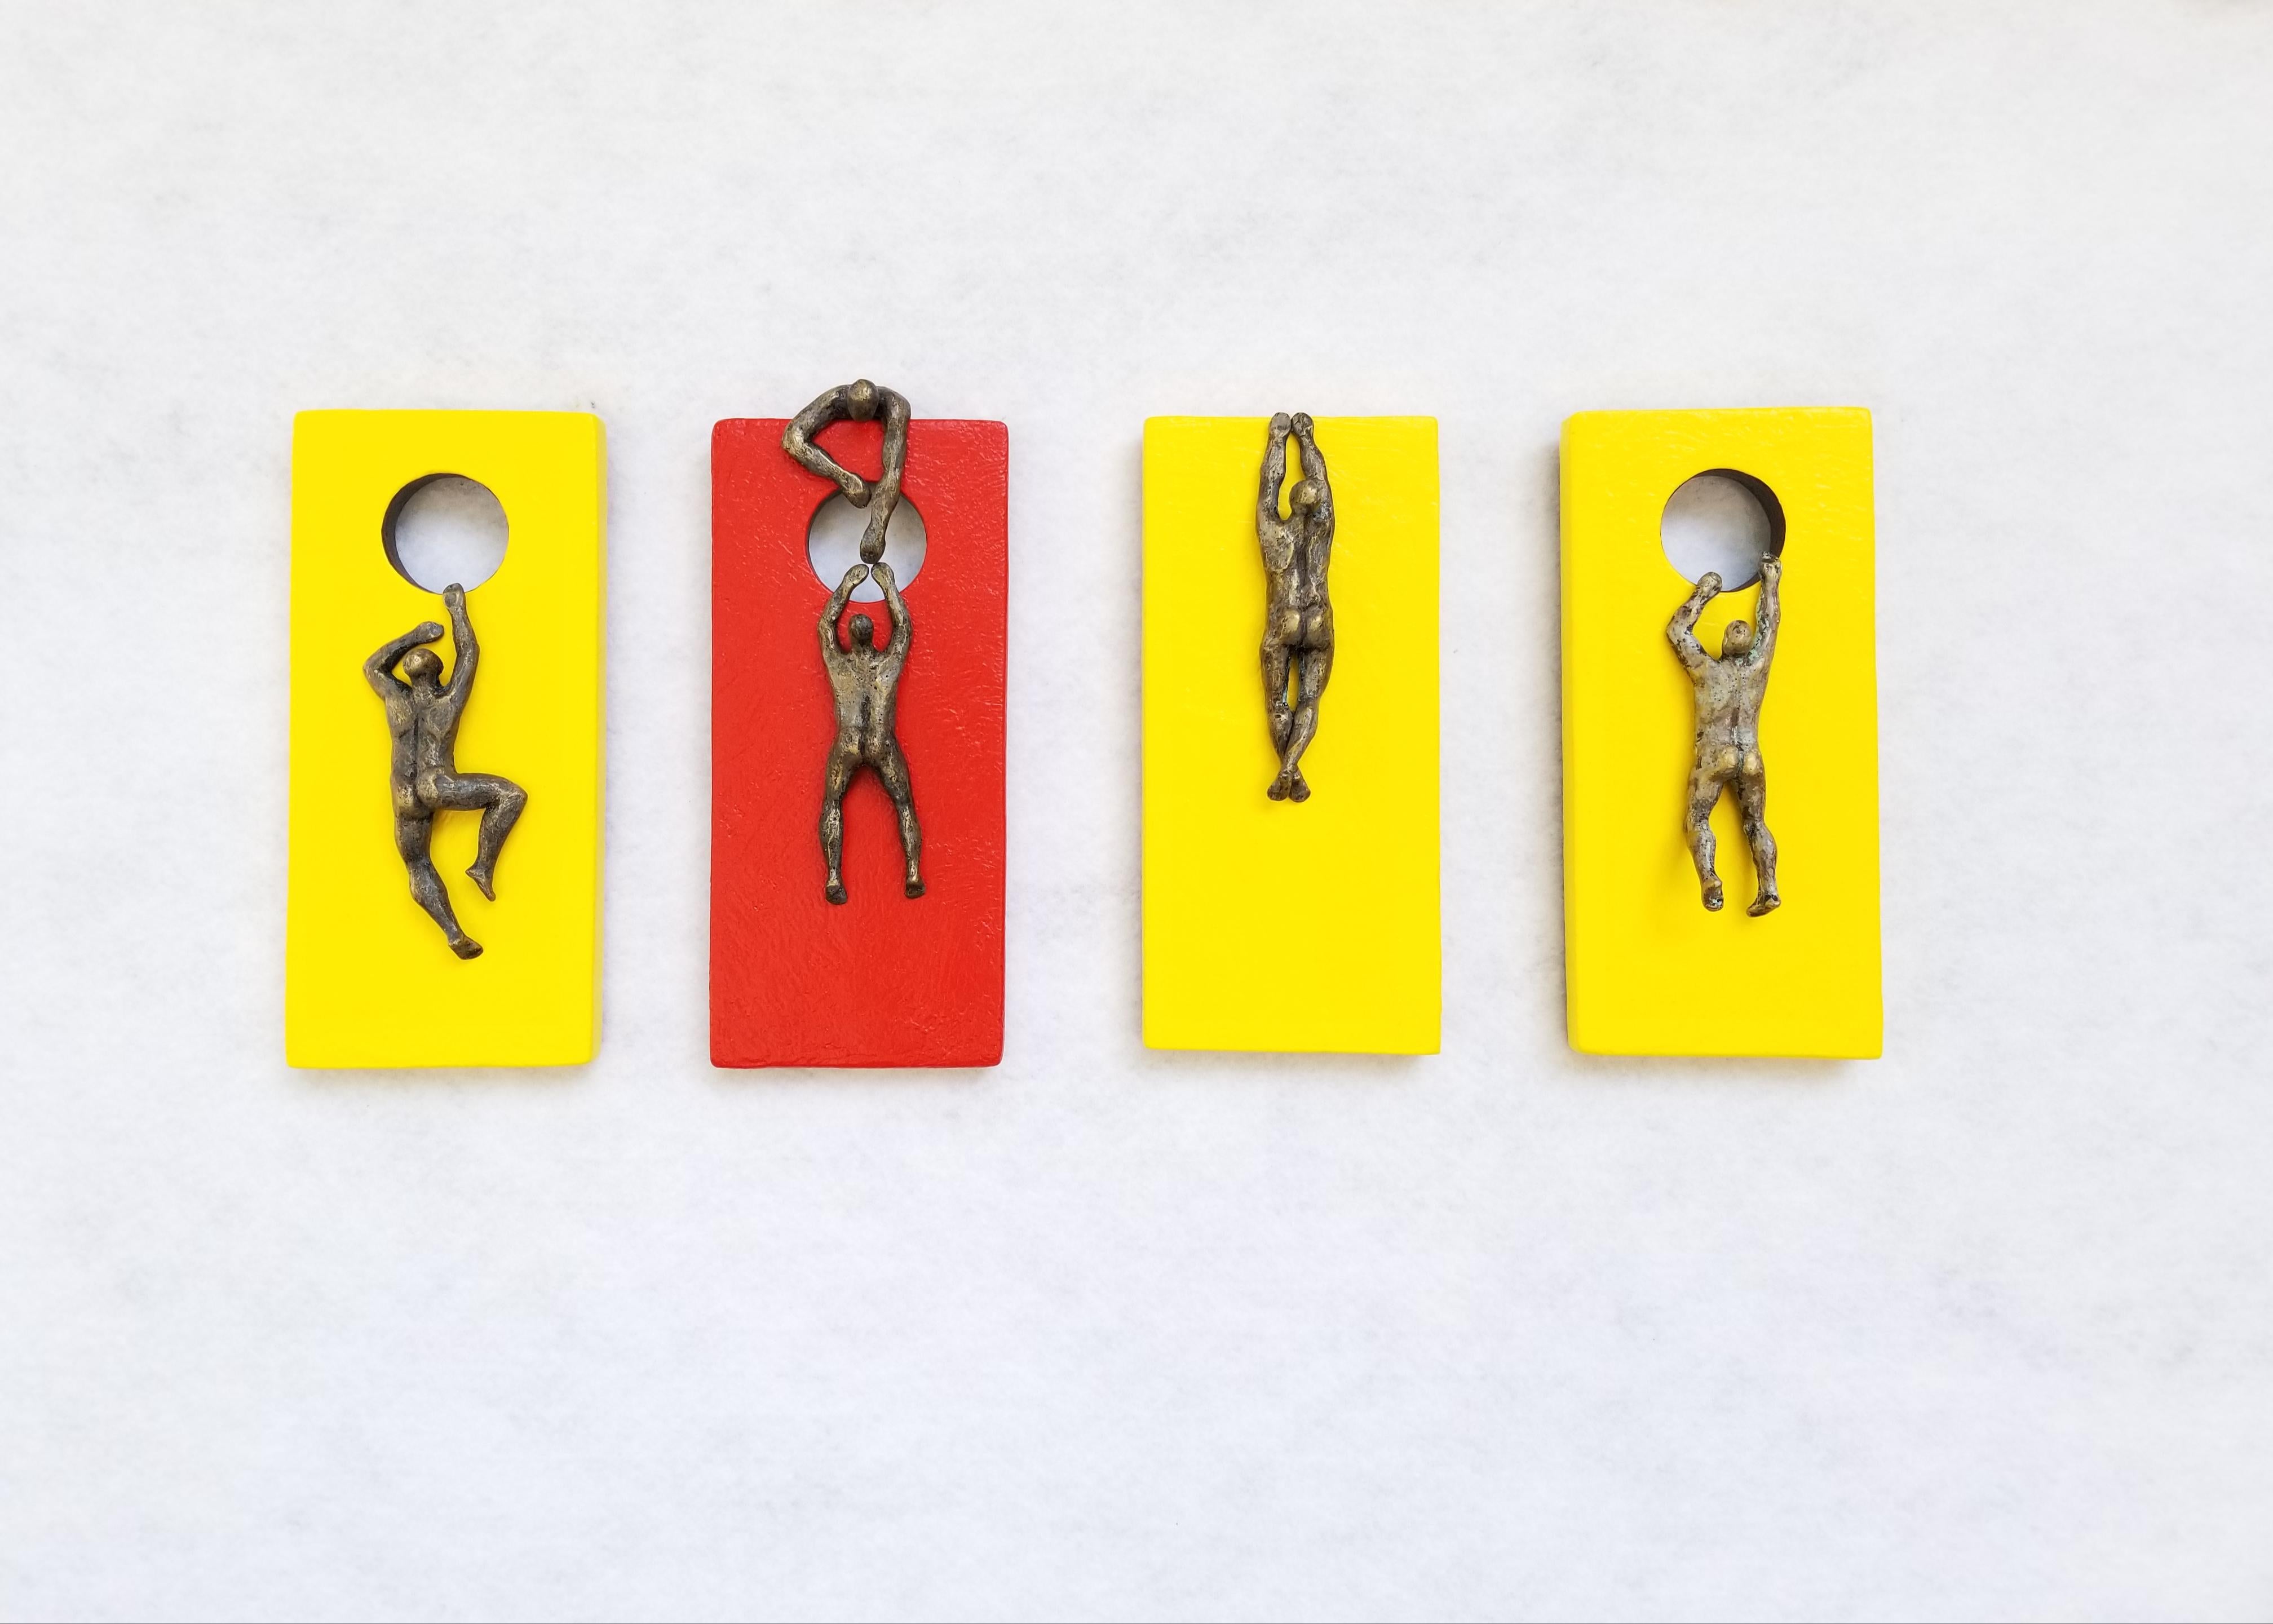 <p>Artist Comments<br>Nude figures climb minimalist structures in bold shades of yellow and red.  Artist Yelitza Diaz presents a conceptual piece representing the human journey of spirituality and elevation of being. Yelitza paints the figures with